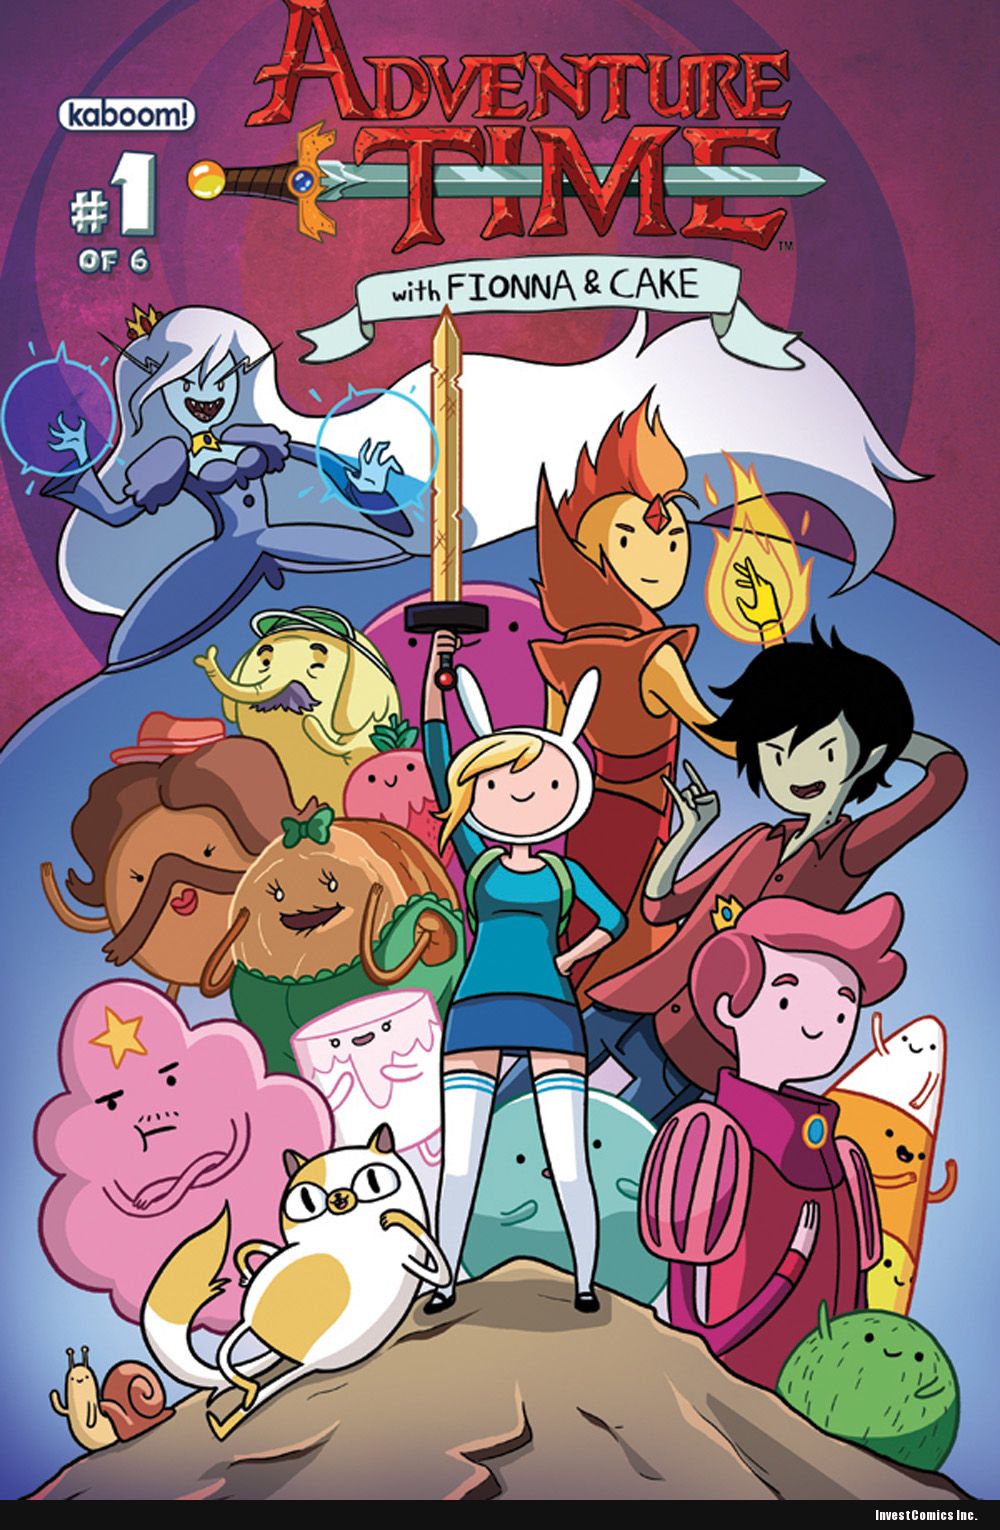 FIONNA & CAKE get their own ADVENTURE TIME Spin-off mini from KABOOM!